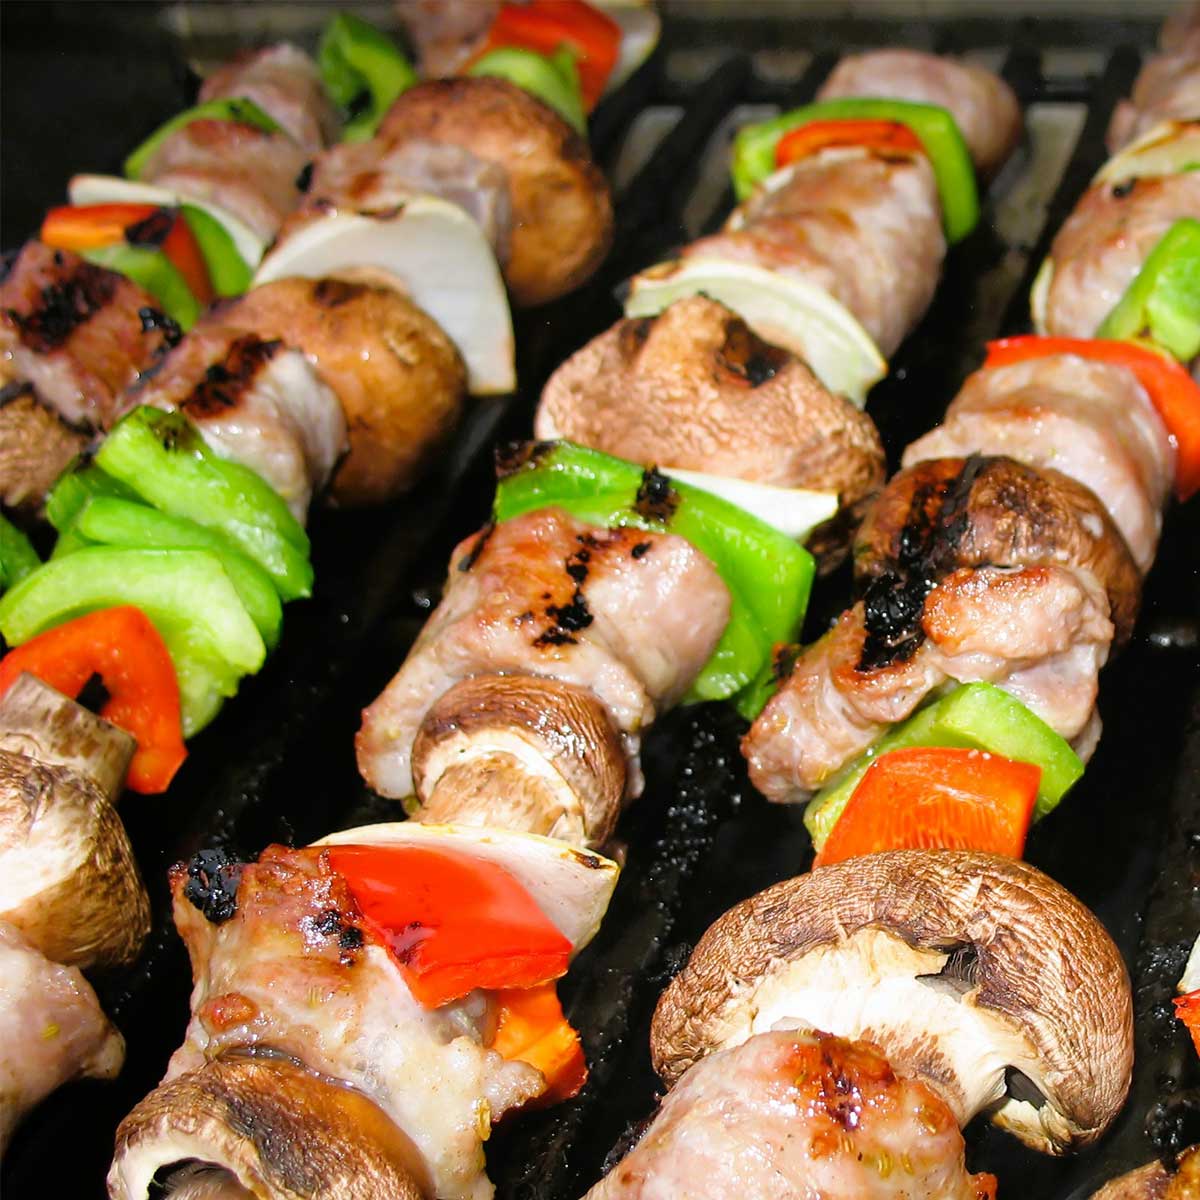 Sausage and vegetable kabobs on grill for August dinner.